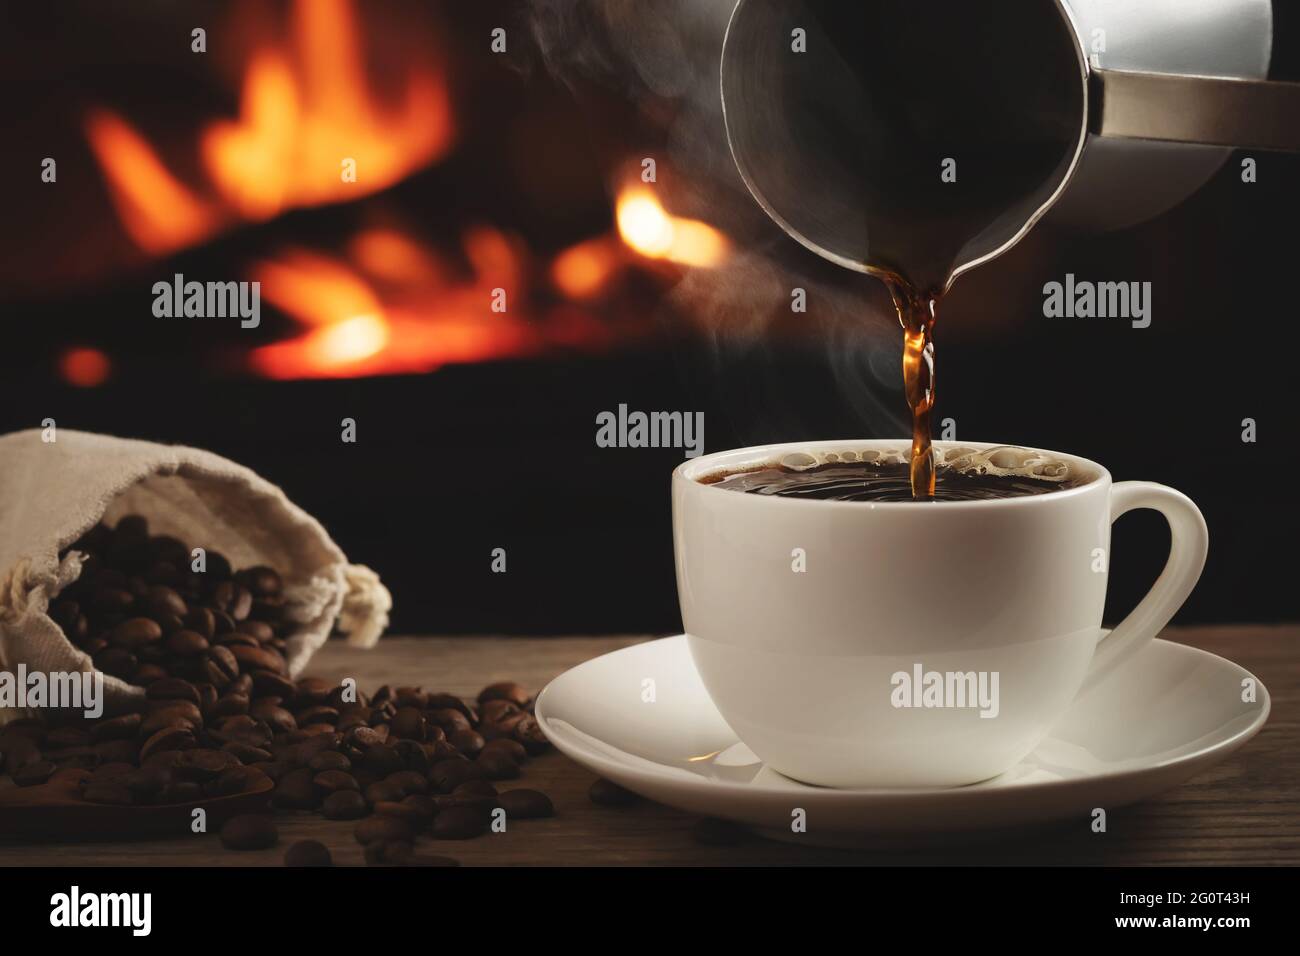 Pouring cezve coffee into a cup on a wooden table in front of a burning fireplace. Selective focus. Stock Photo